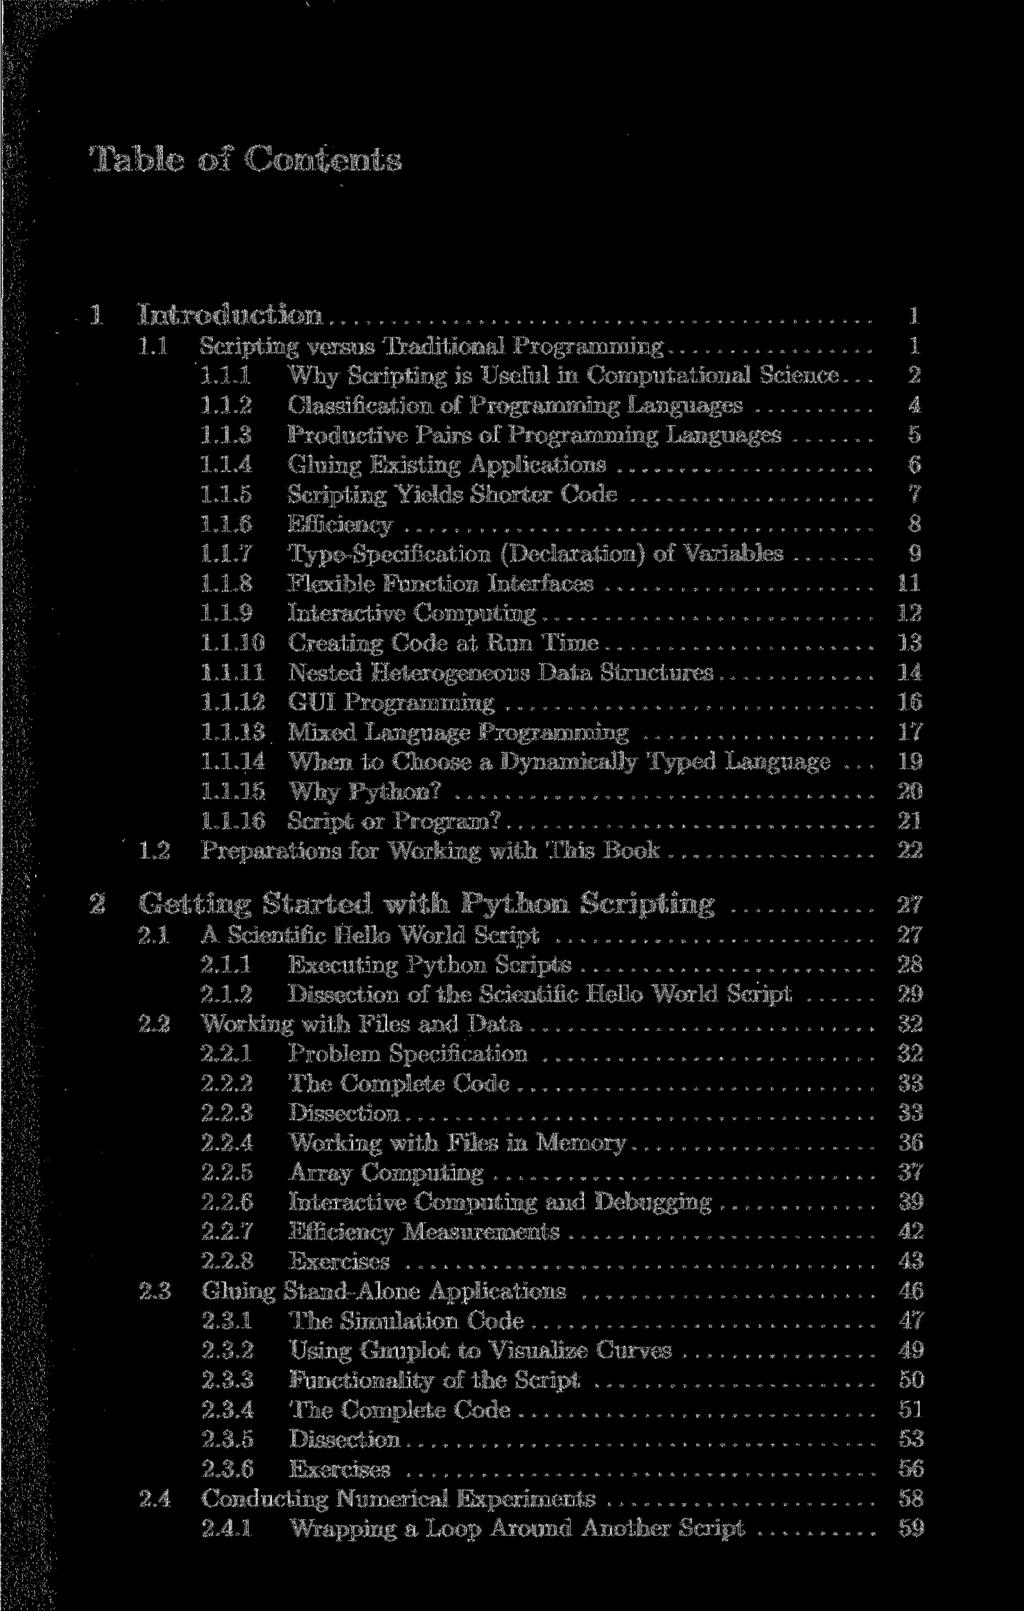 Table of Contents 1 Introduction 1 1.1 Scripting versus Traditional Programming 1 1.1.1 Why Scripting is Useful in Computational Science... 2 1.1.2 Classification of Programming Languages 4 1.1.3 Productive Pairs of Programming Languages 5 1.